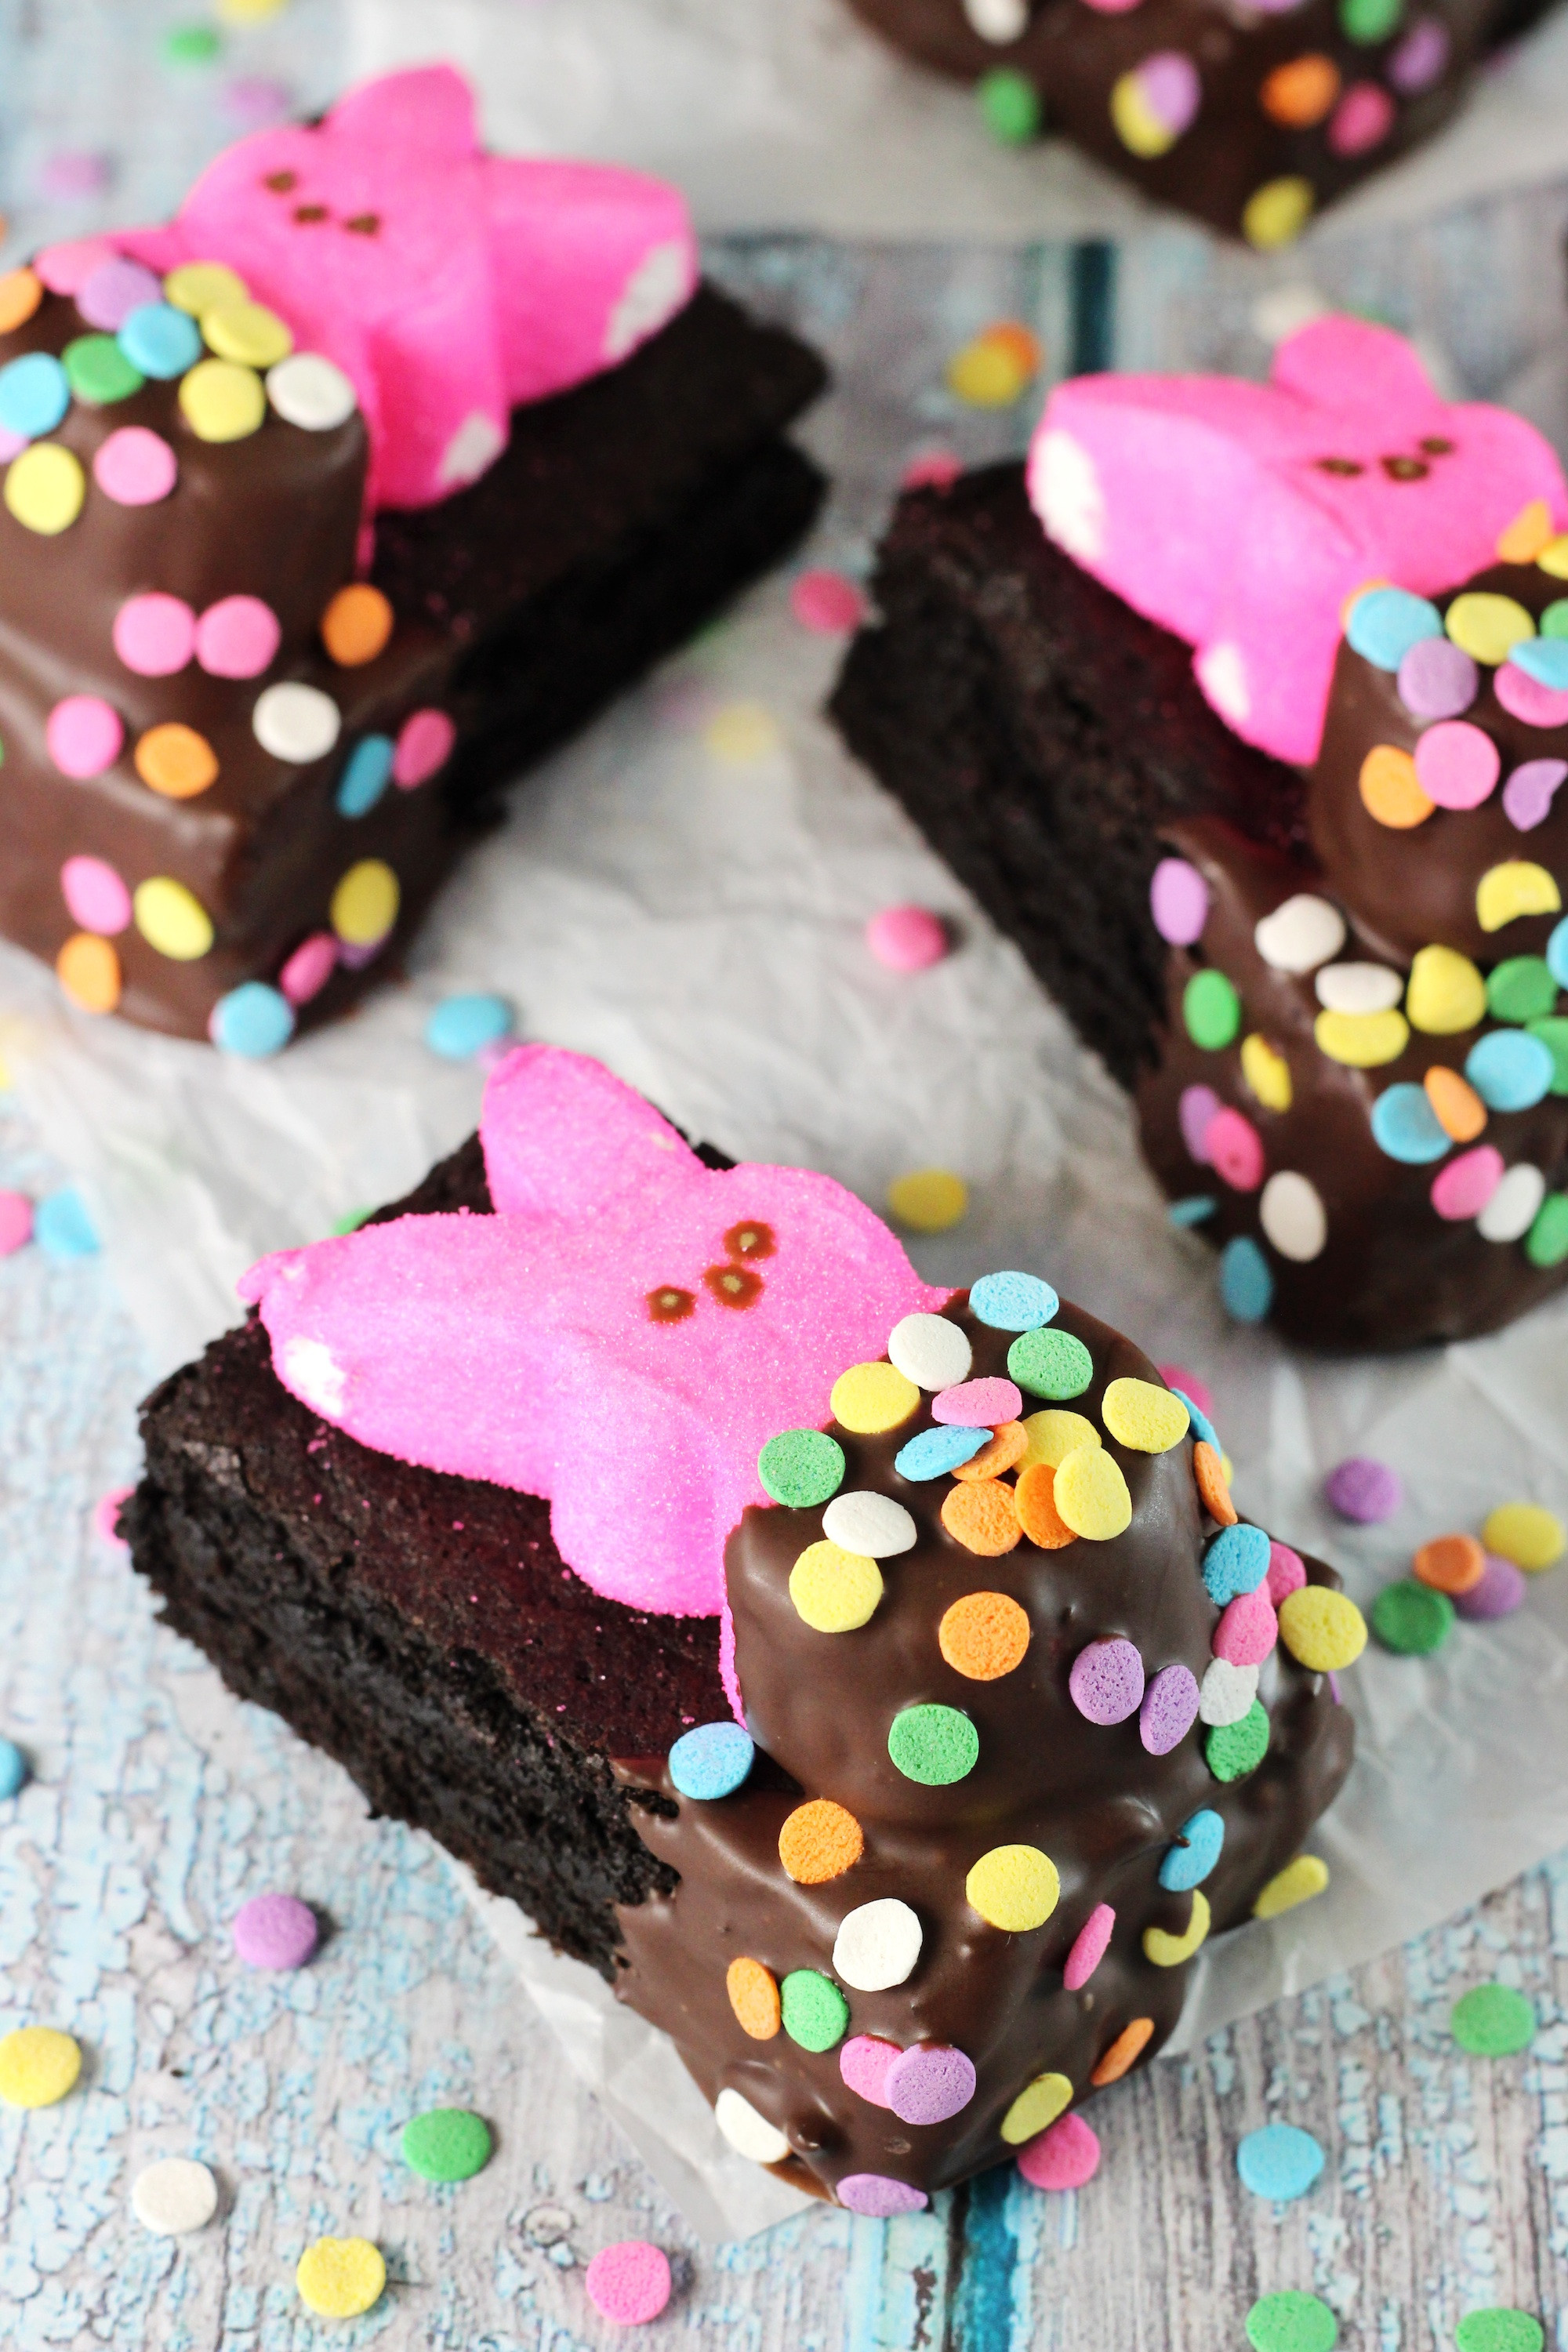 Easter Bunny Desserts 20 Best Ideas 11 Easy Easter Desserts that are Almost too Adorable to